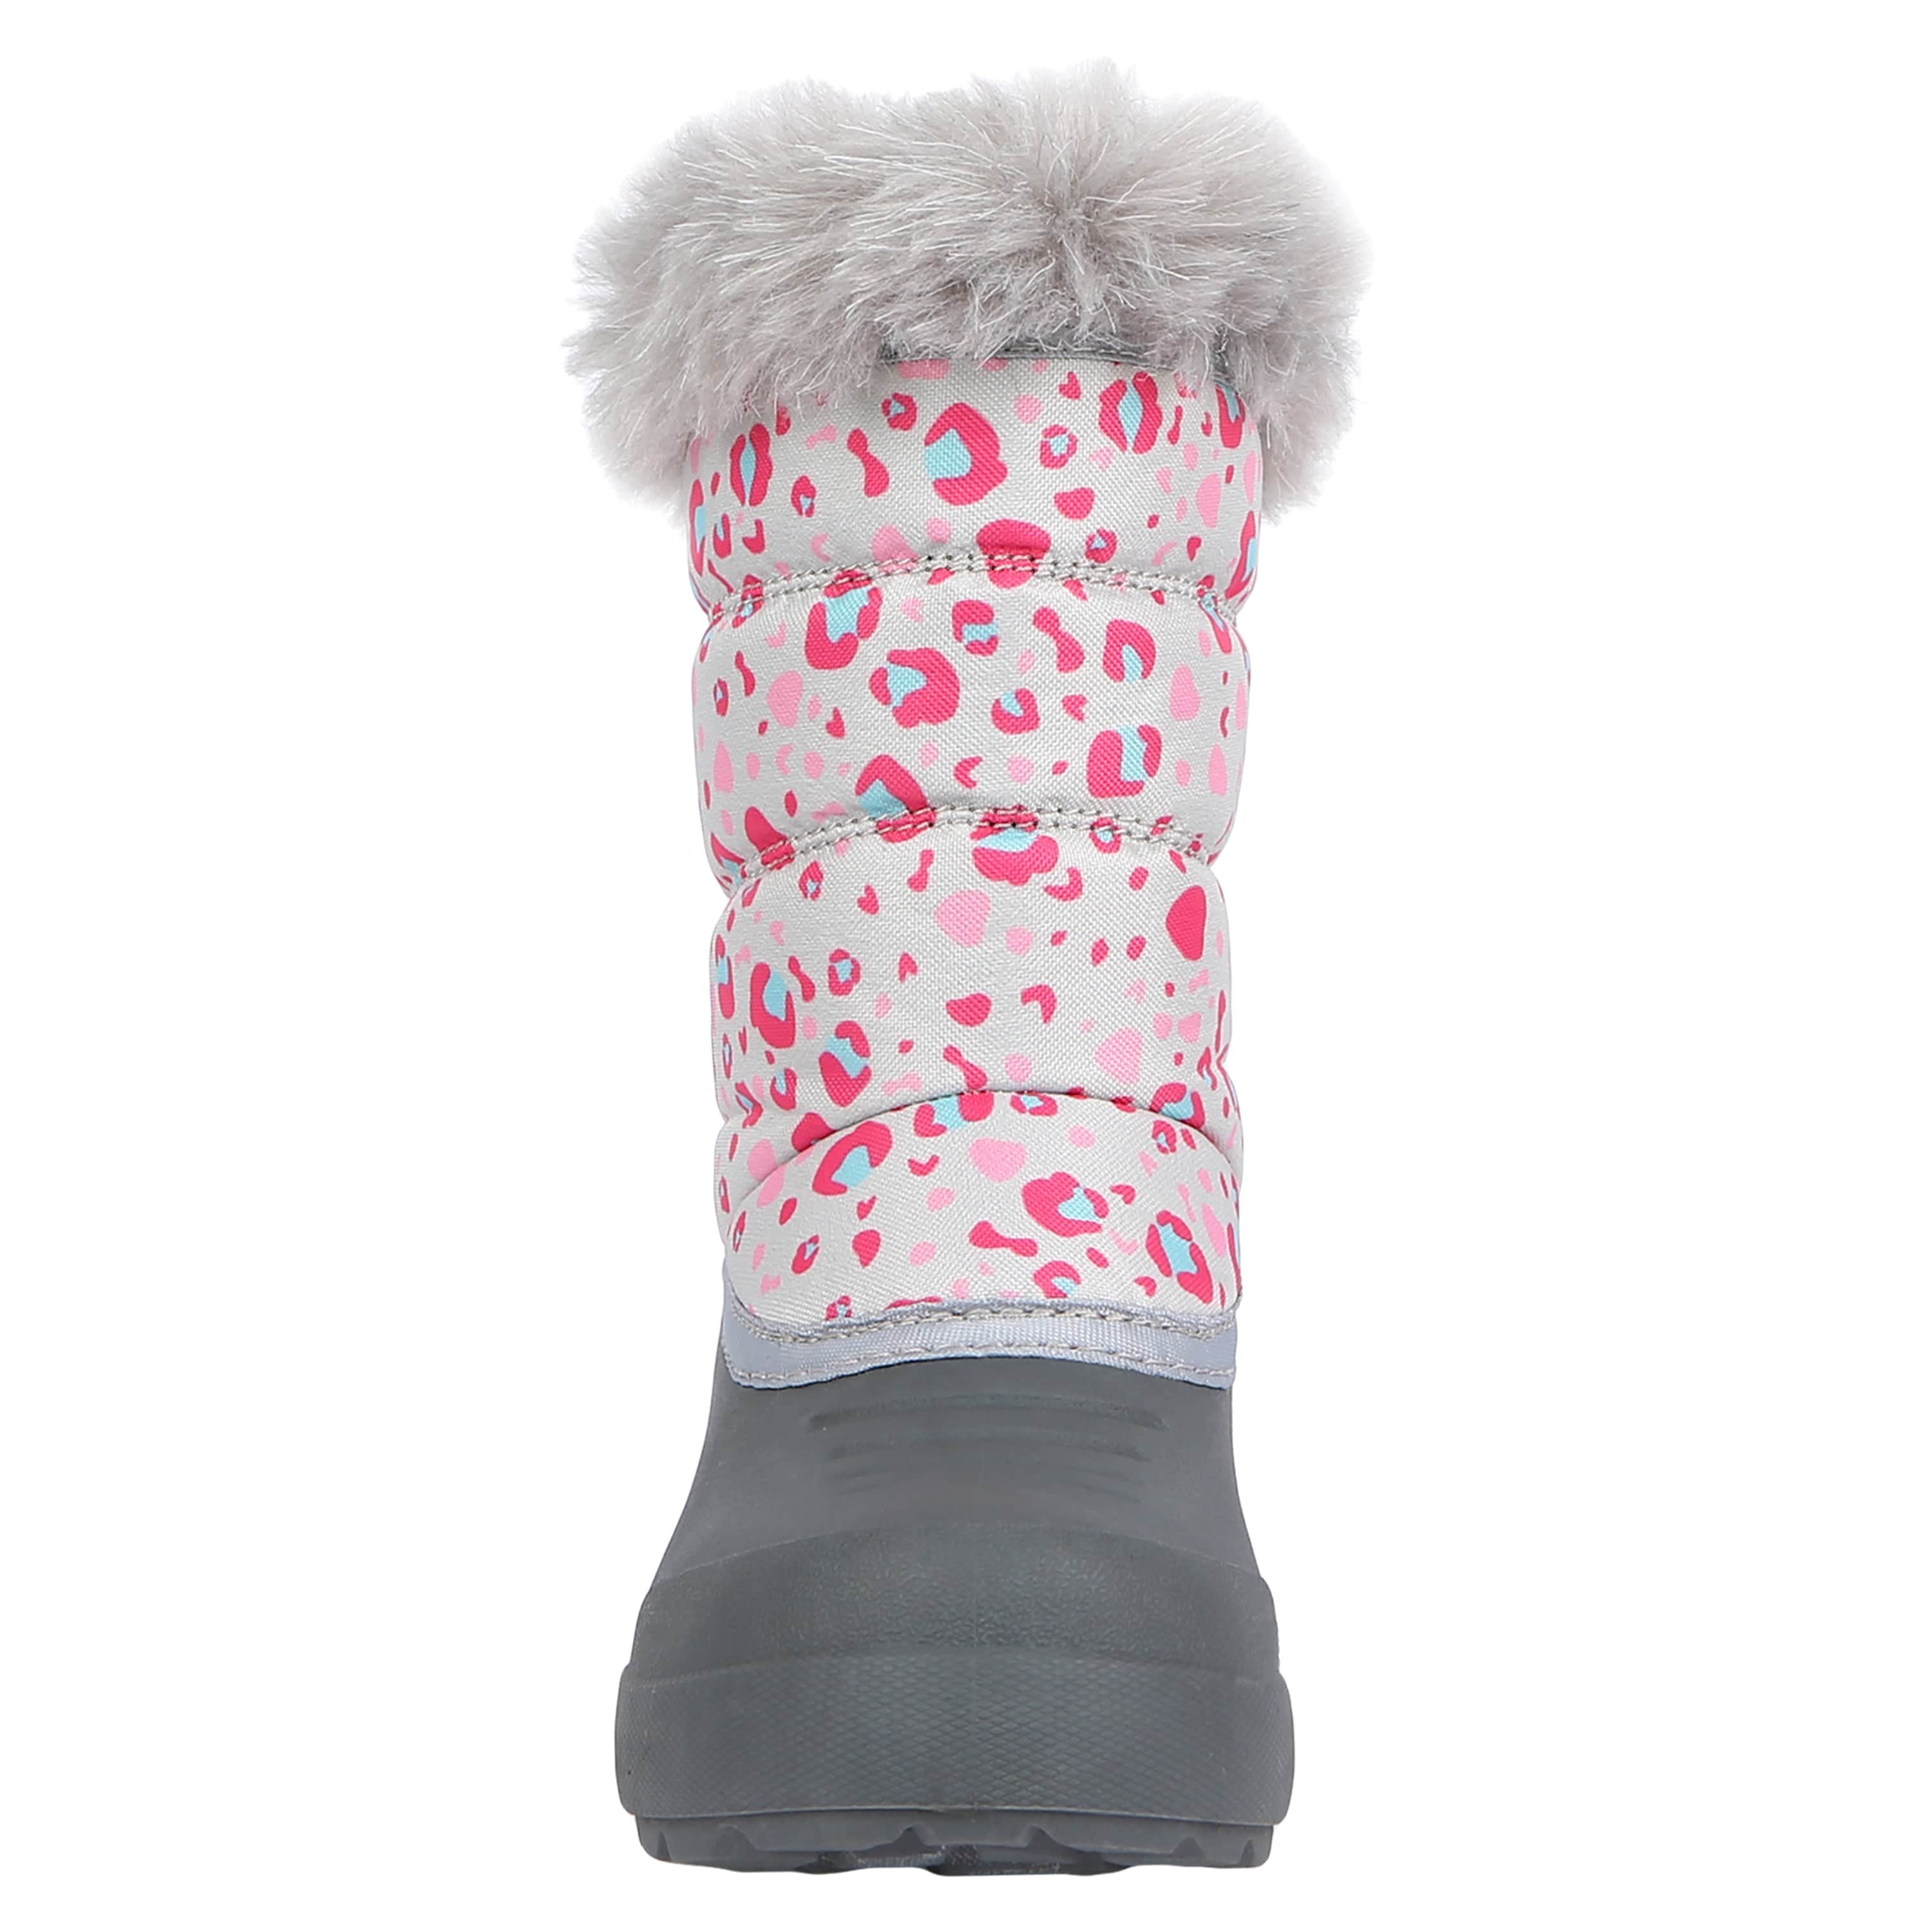 Kid's Ava Cold Weather Snow Boot - Northside USA